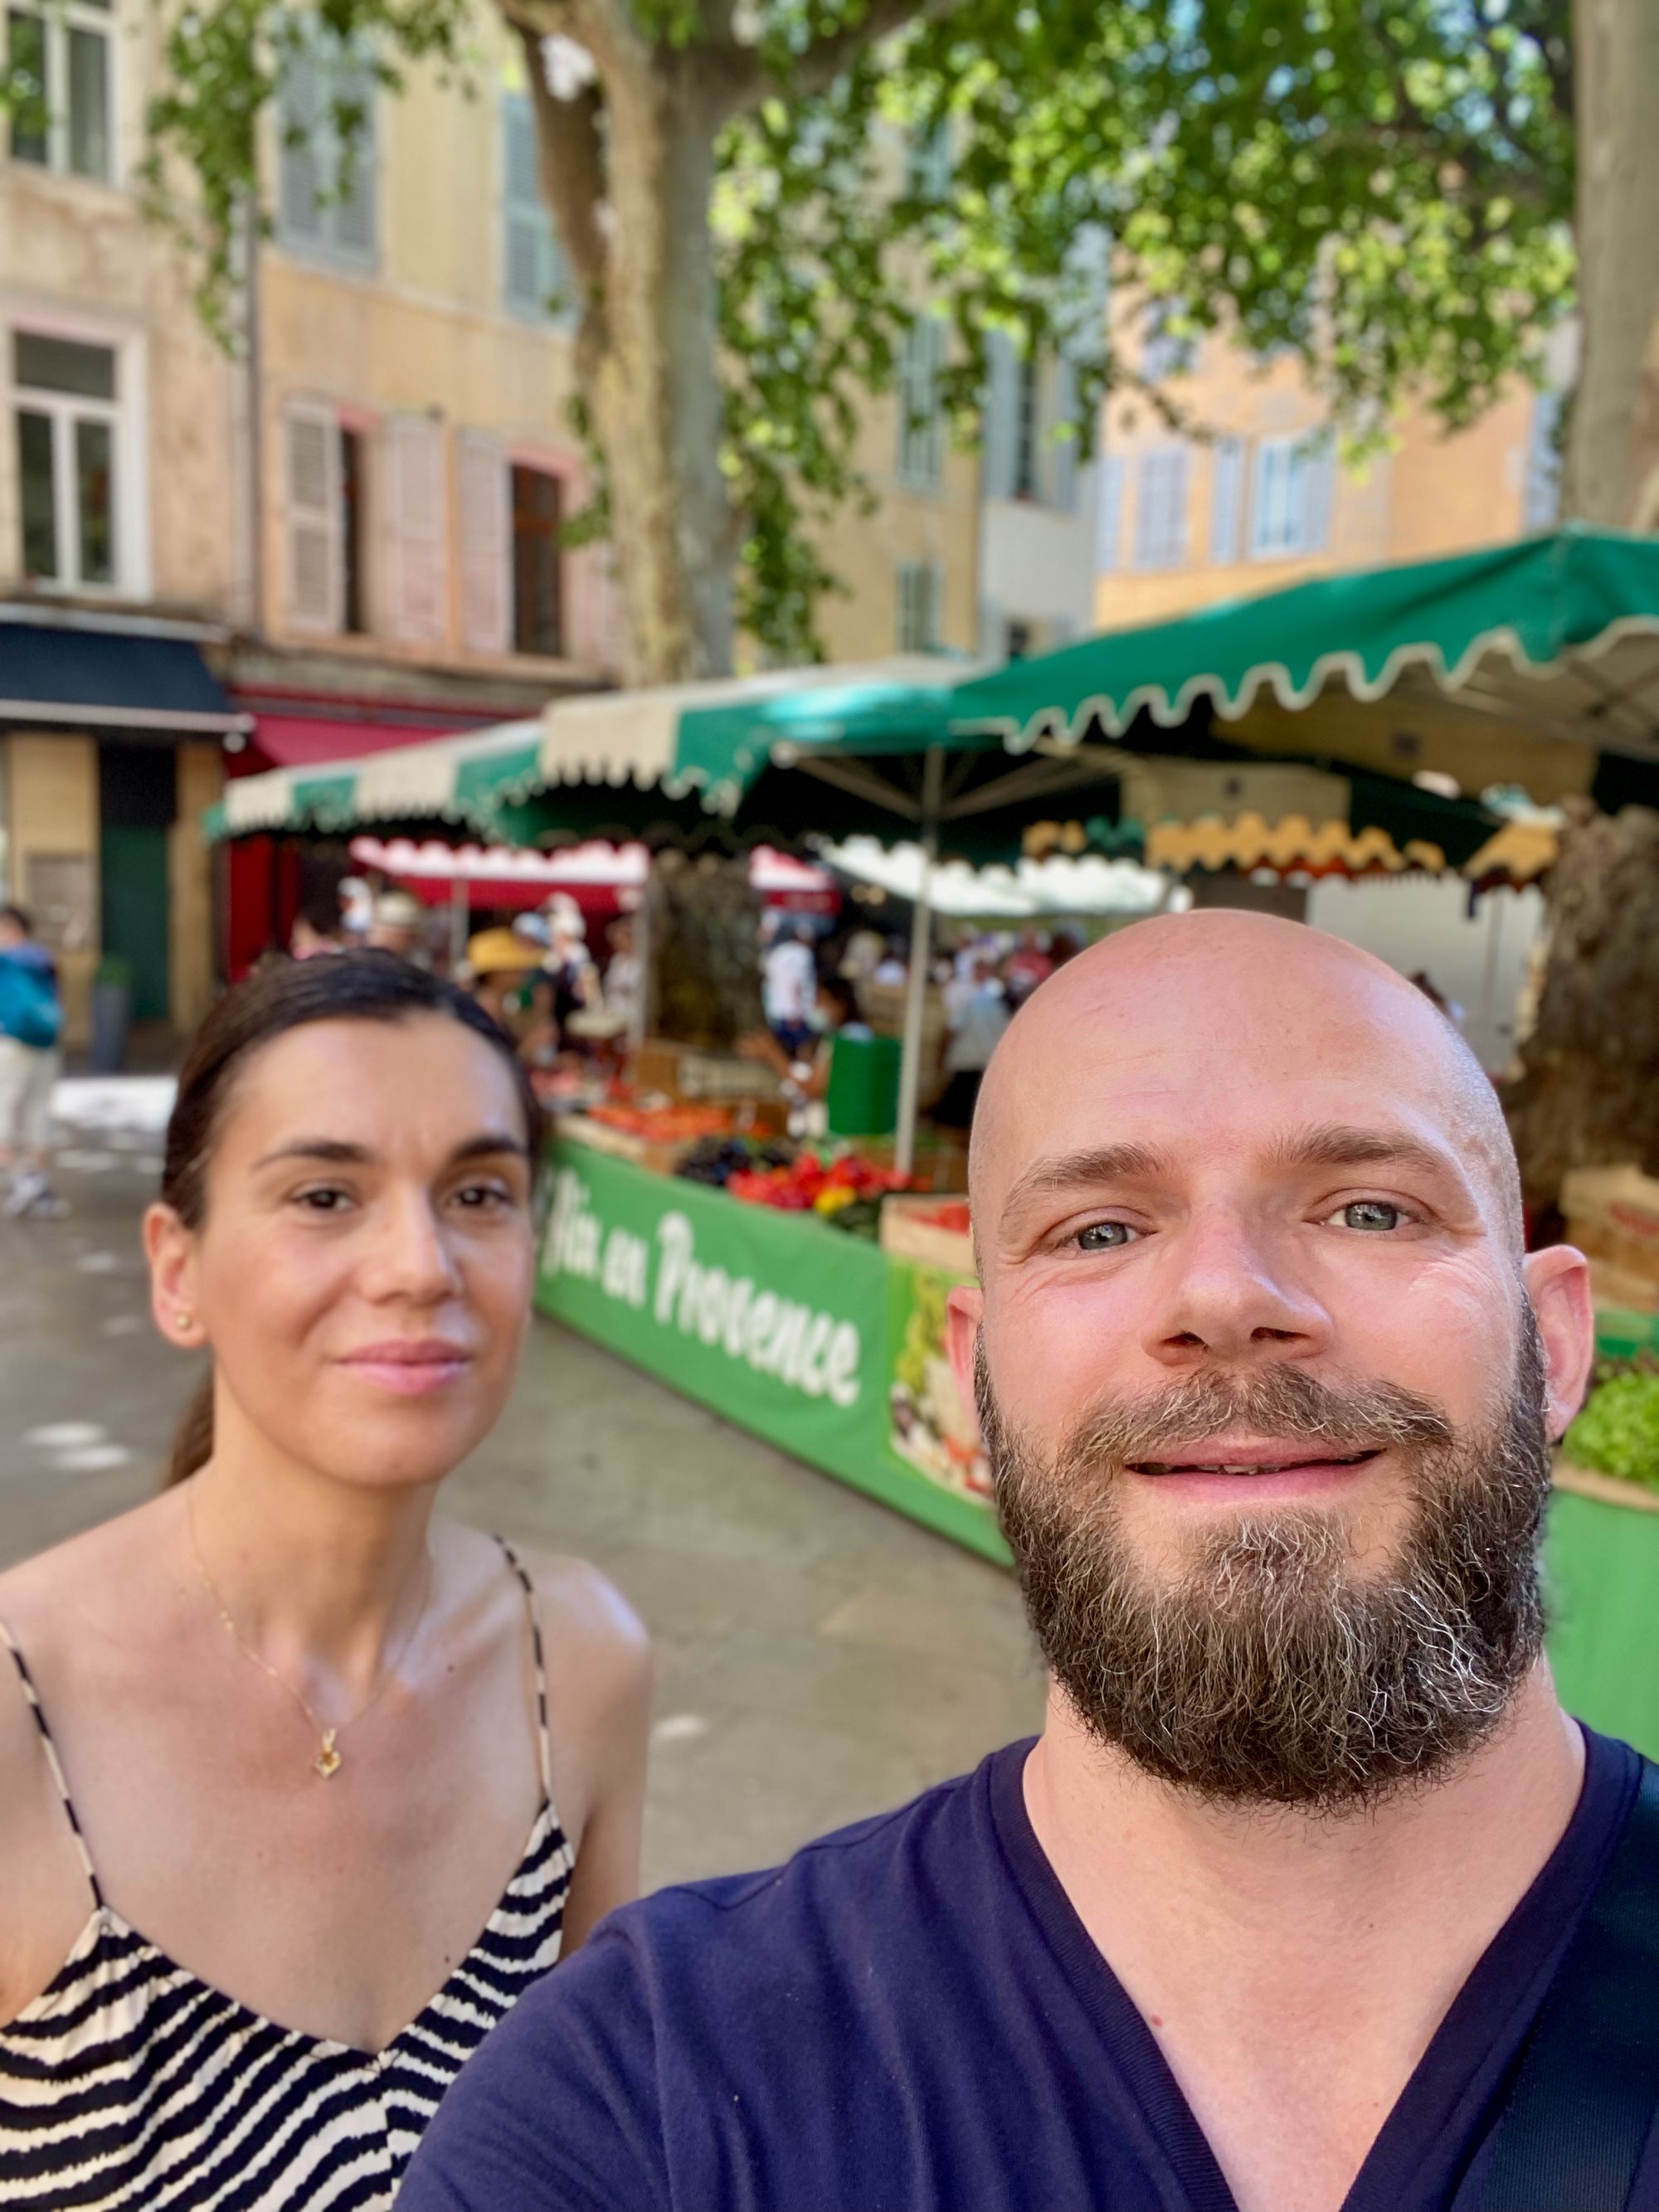 Second Road Trip Part 02: South of France in 8 days